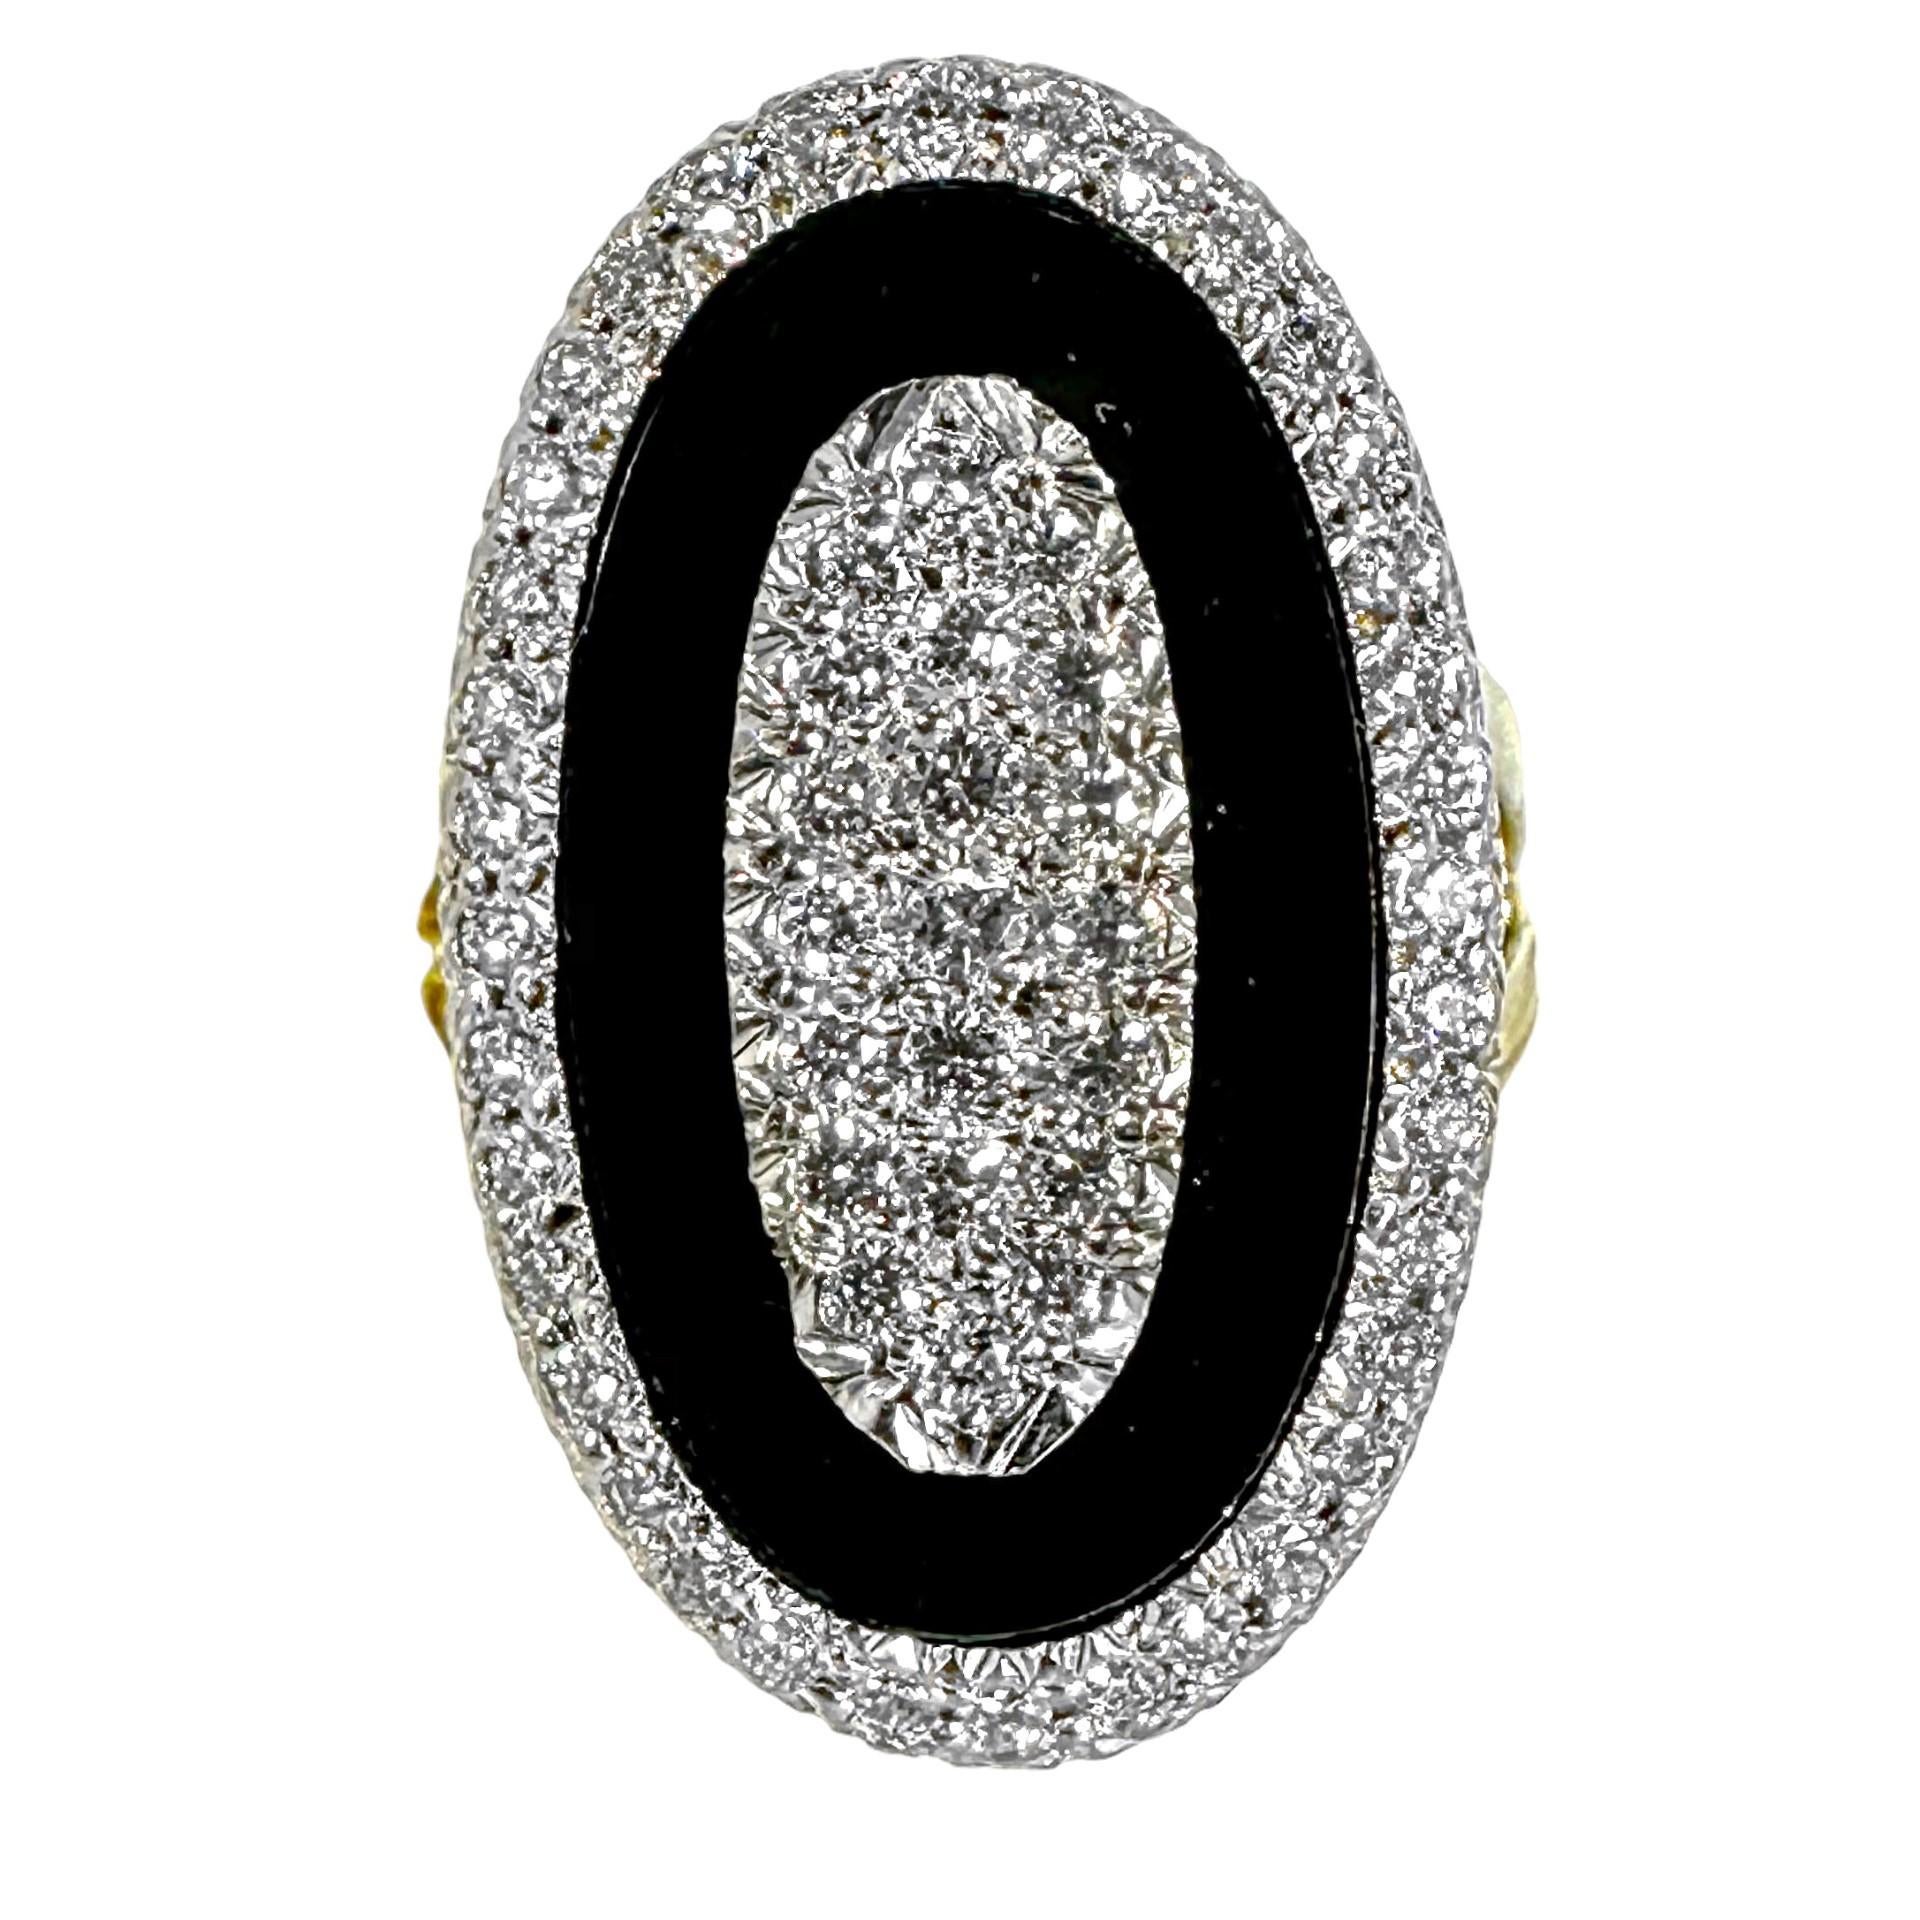 Onyx, Diamond and 18K Gold, Oval Shaped Ring 1 Inch Long x 5/8 Inch Wide For Sale 2